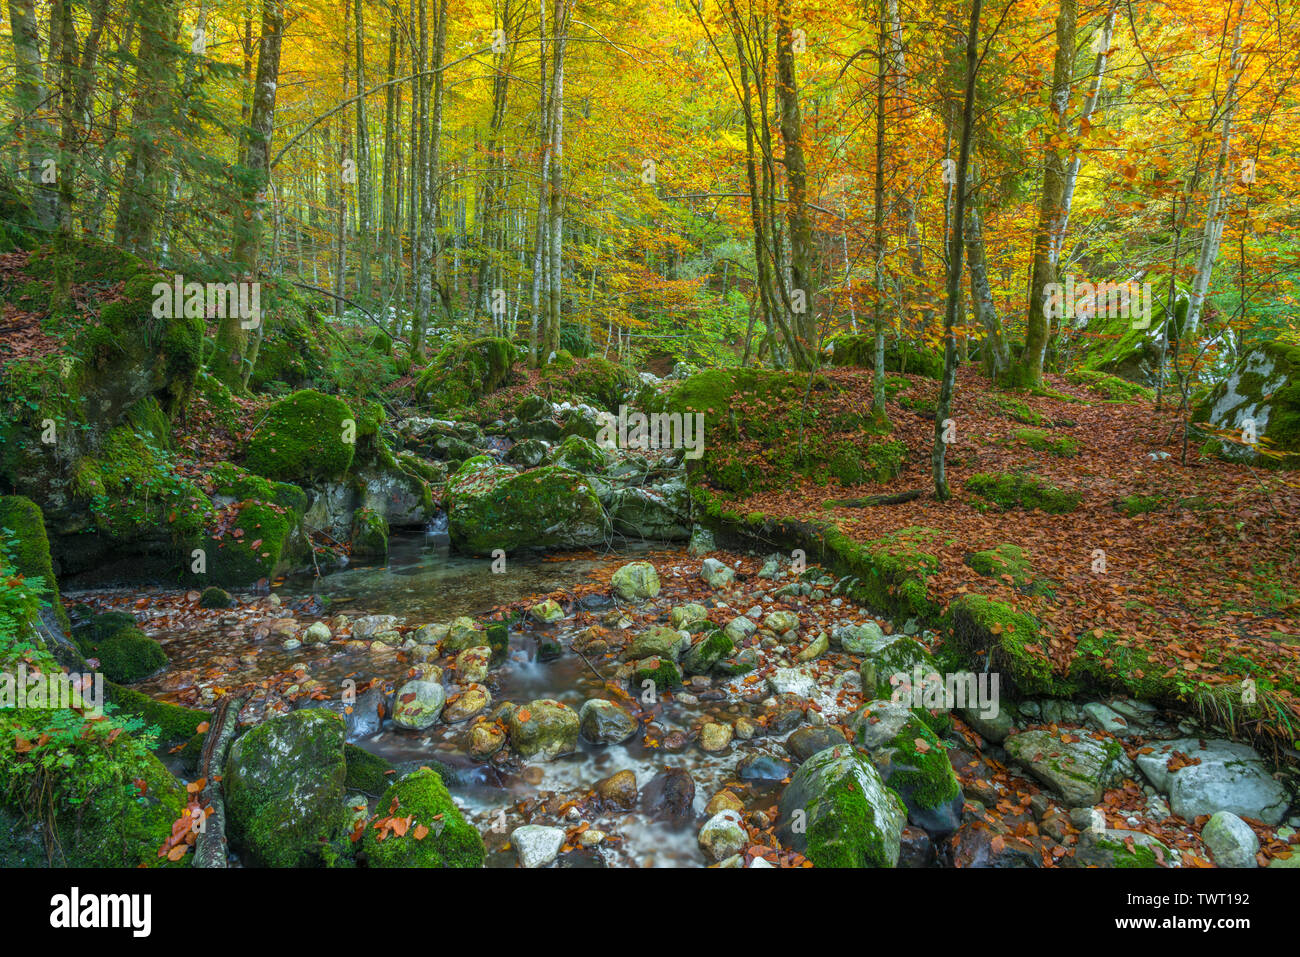 Autumn foliage in Slovenia. Fall colours in Europe. Colorful vegetation in autumn, golden leaves on the trees and dead leaves on the forest floor. Stock Photo